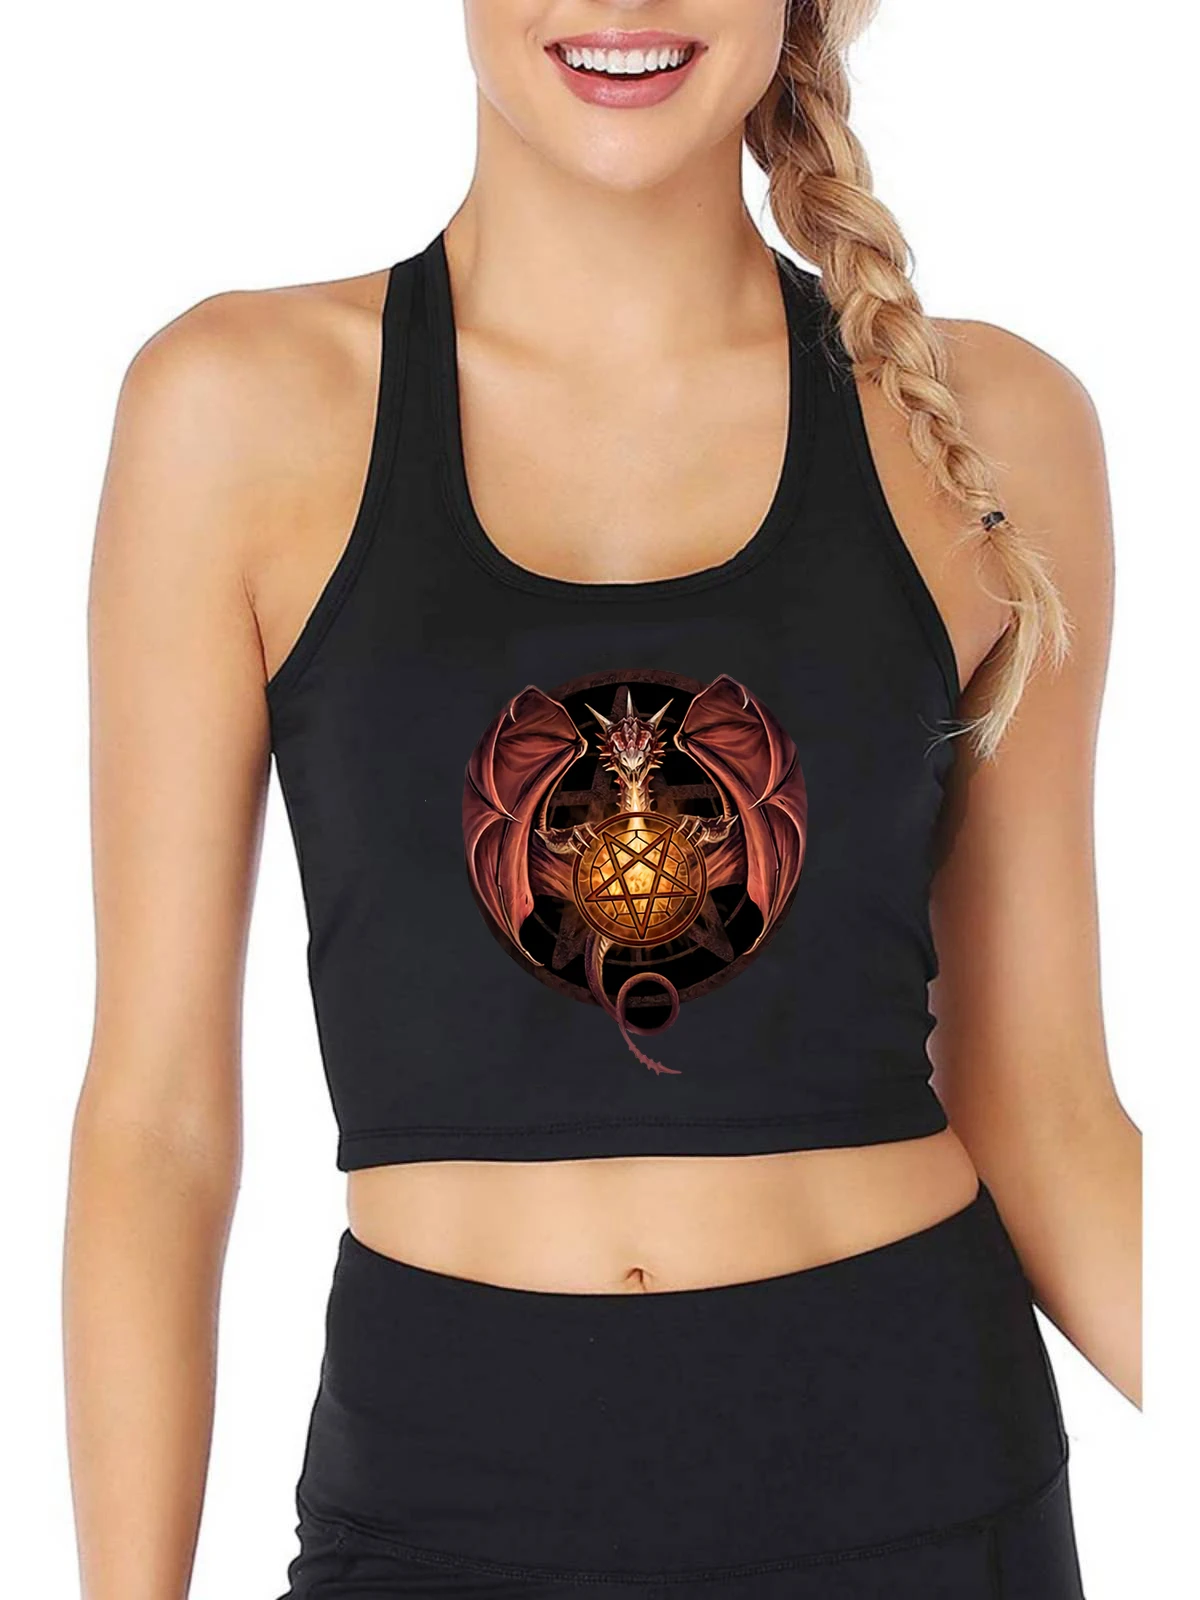 

Satanic Dragon Design Personality Sexy Tank Tops Women's Trend Breathable Slim Fit Crop Top Gym Training Camisole